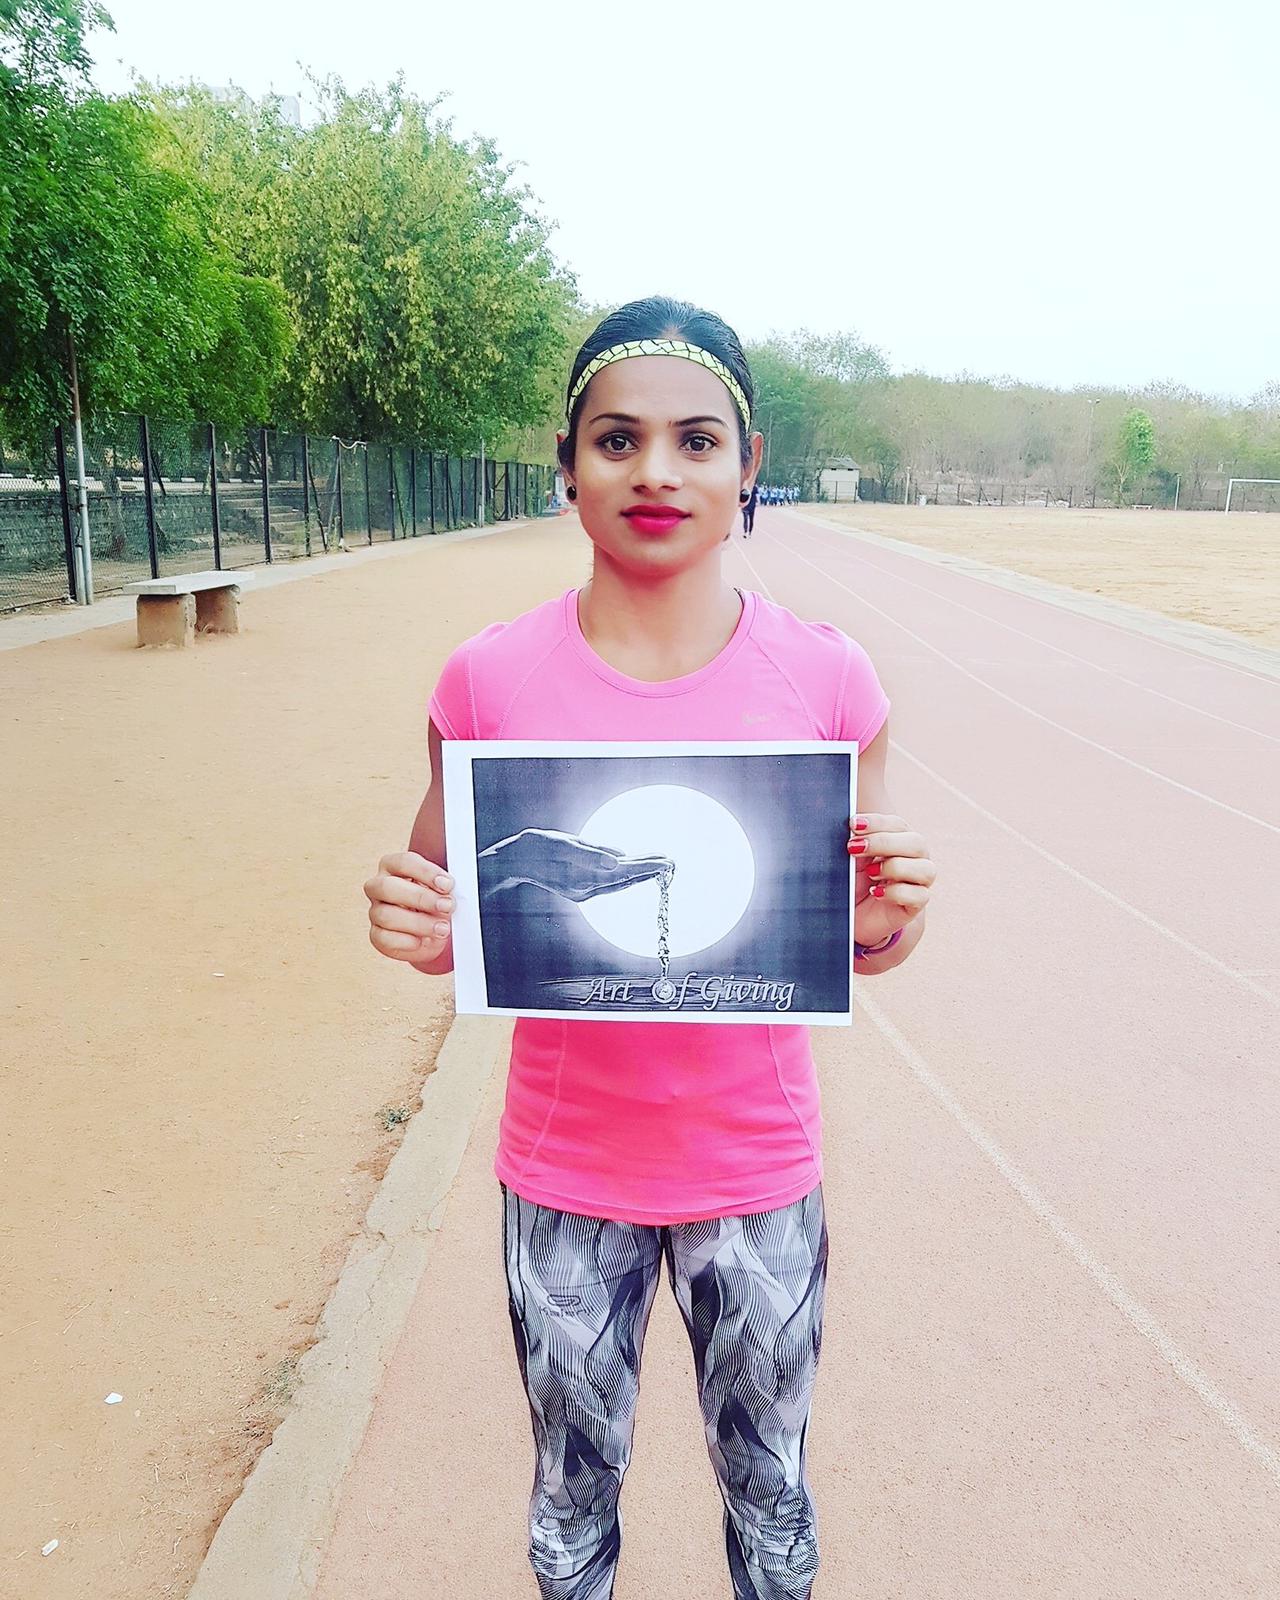 Indian athlete Dutee Chand opens up about her same-sex relationship 